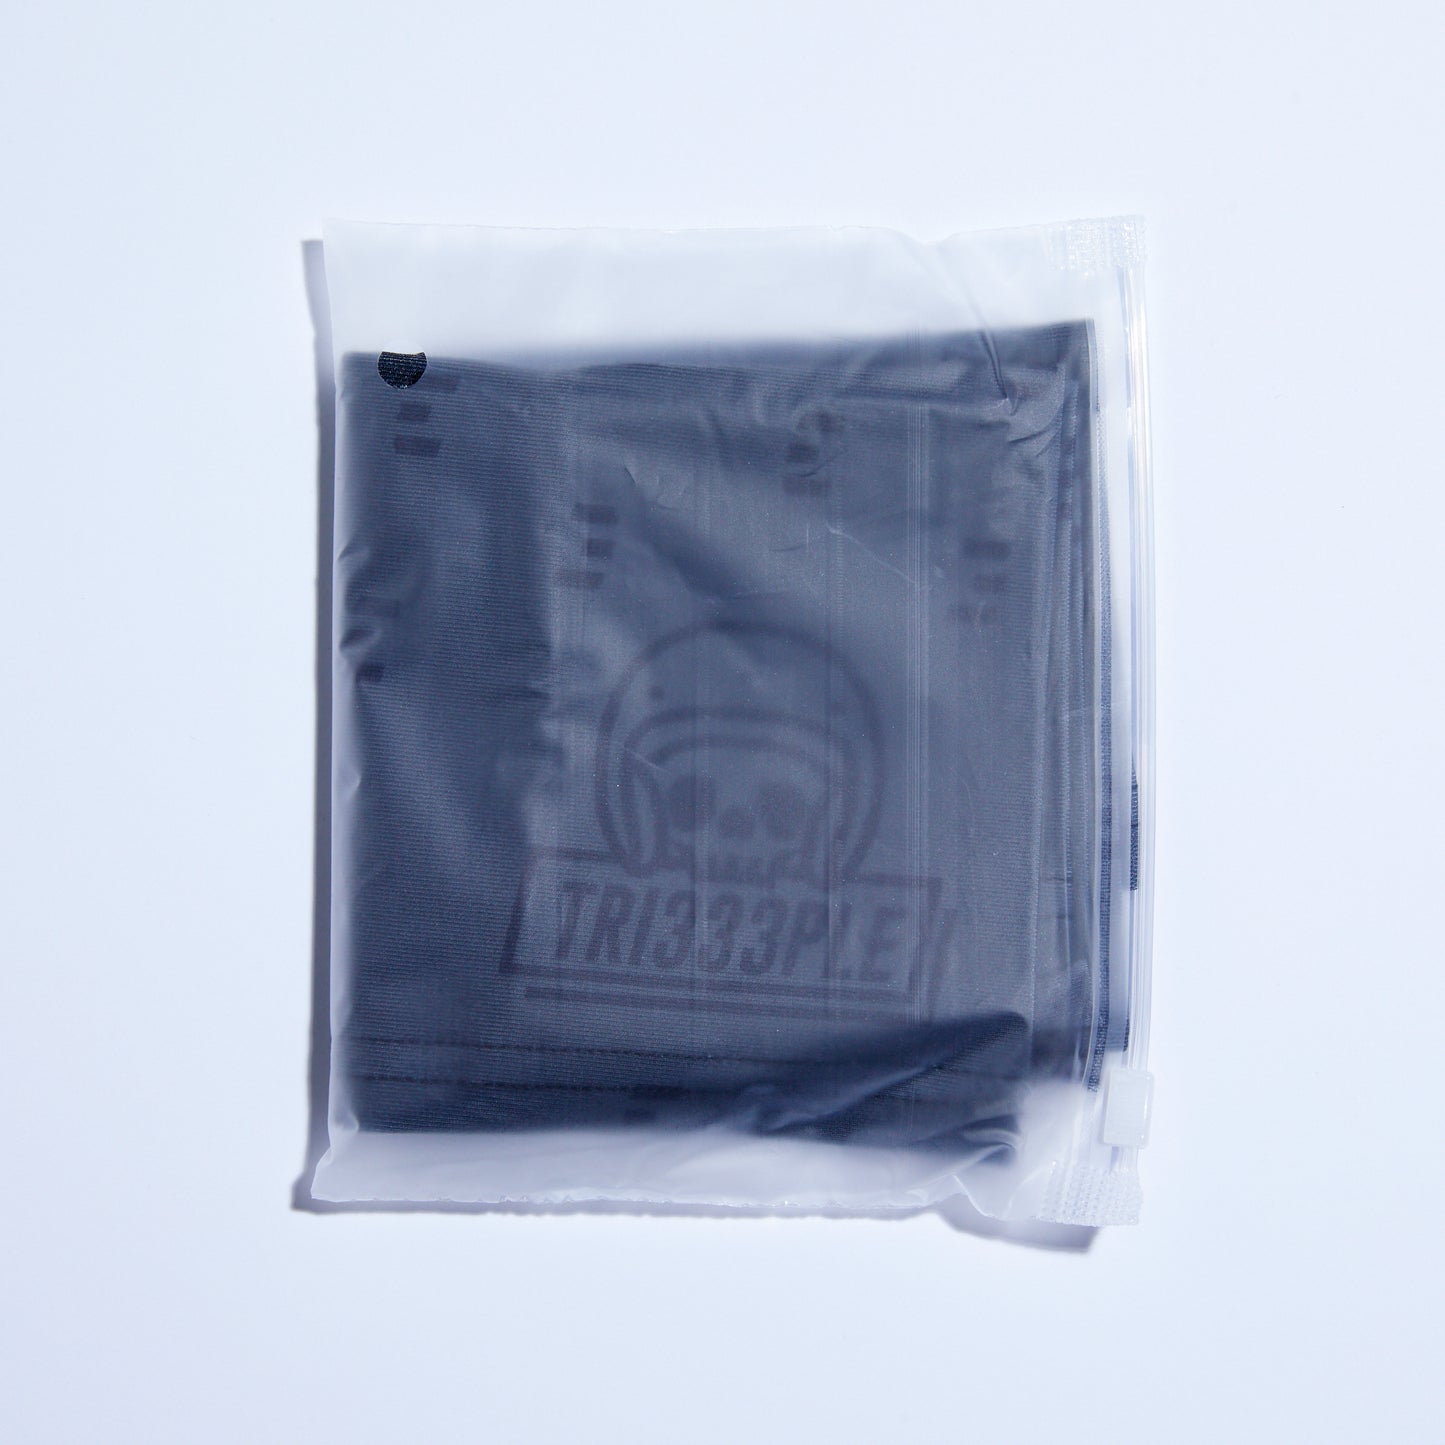 tri333ple lycra headbuff for motorcycle skully blacked out in packaging